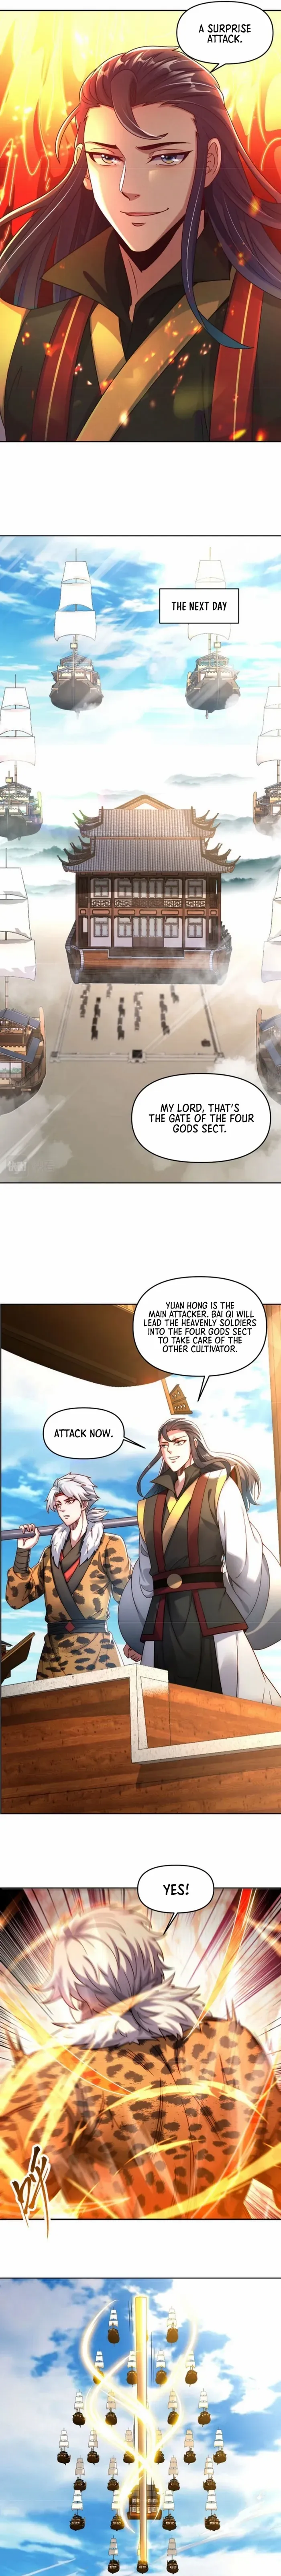 I Can Summon God - Page 3